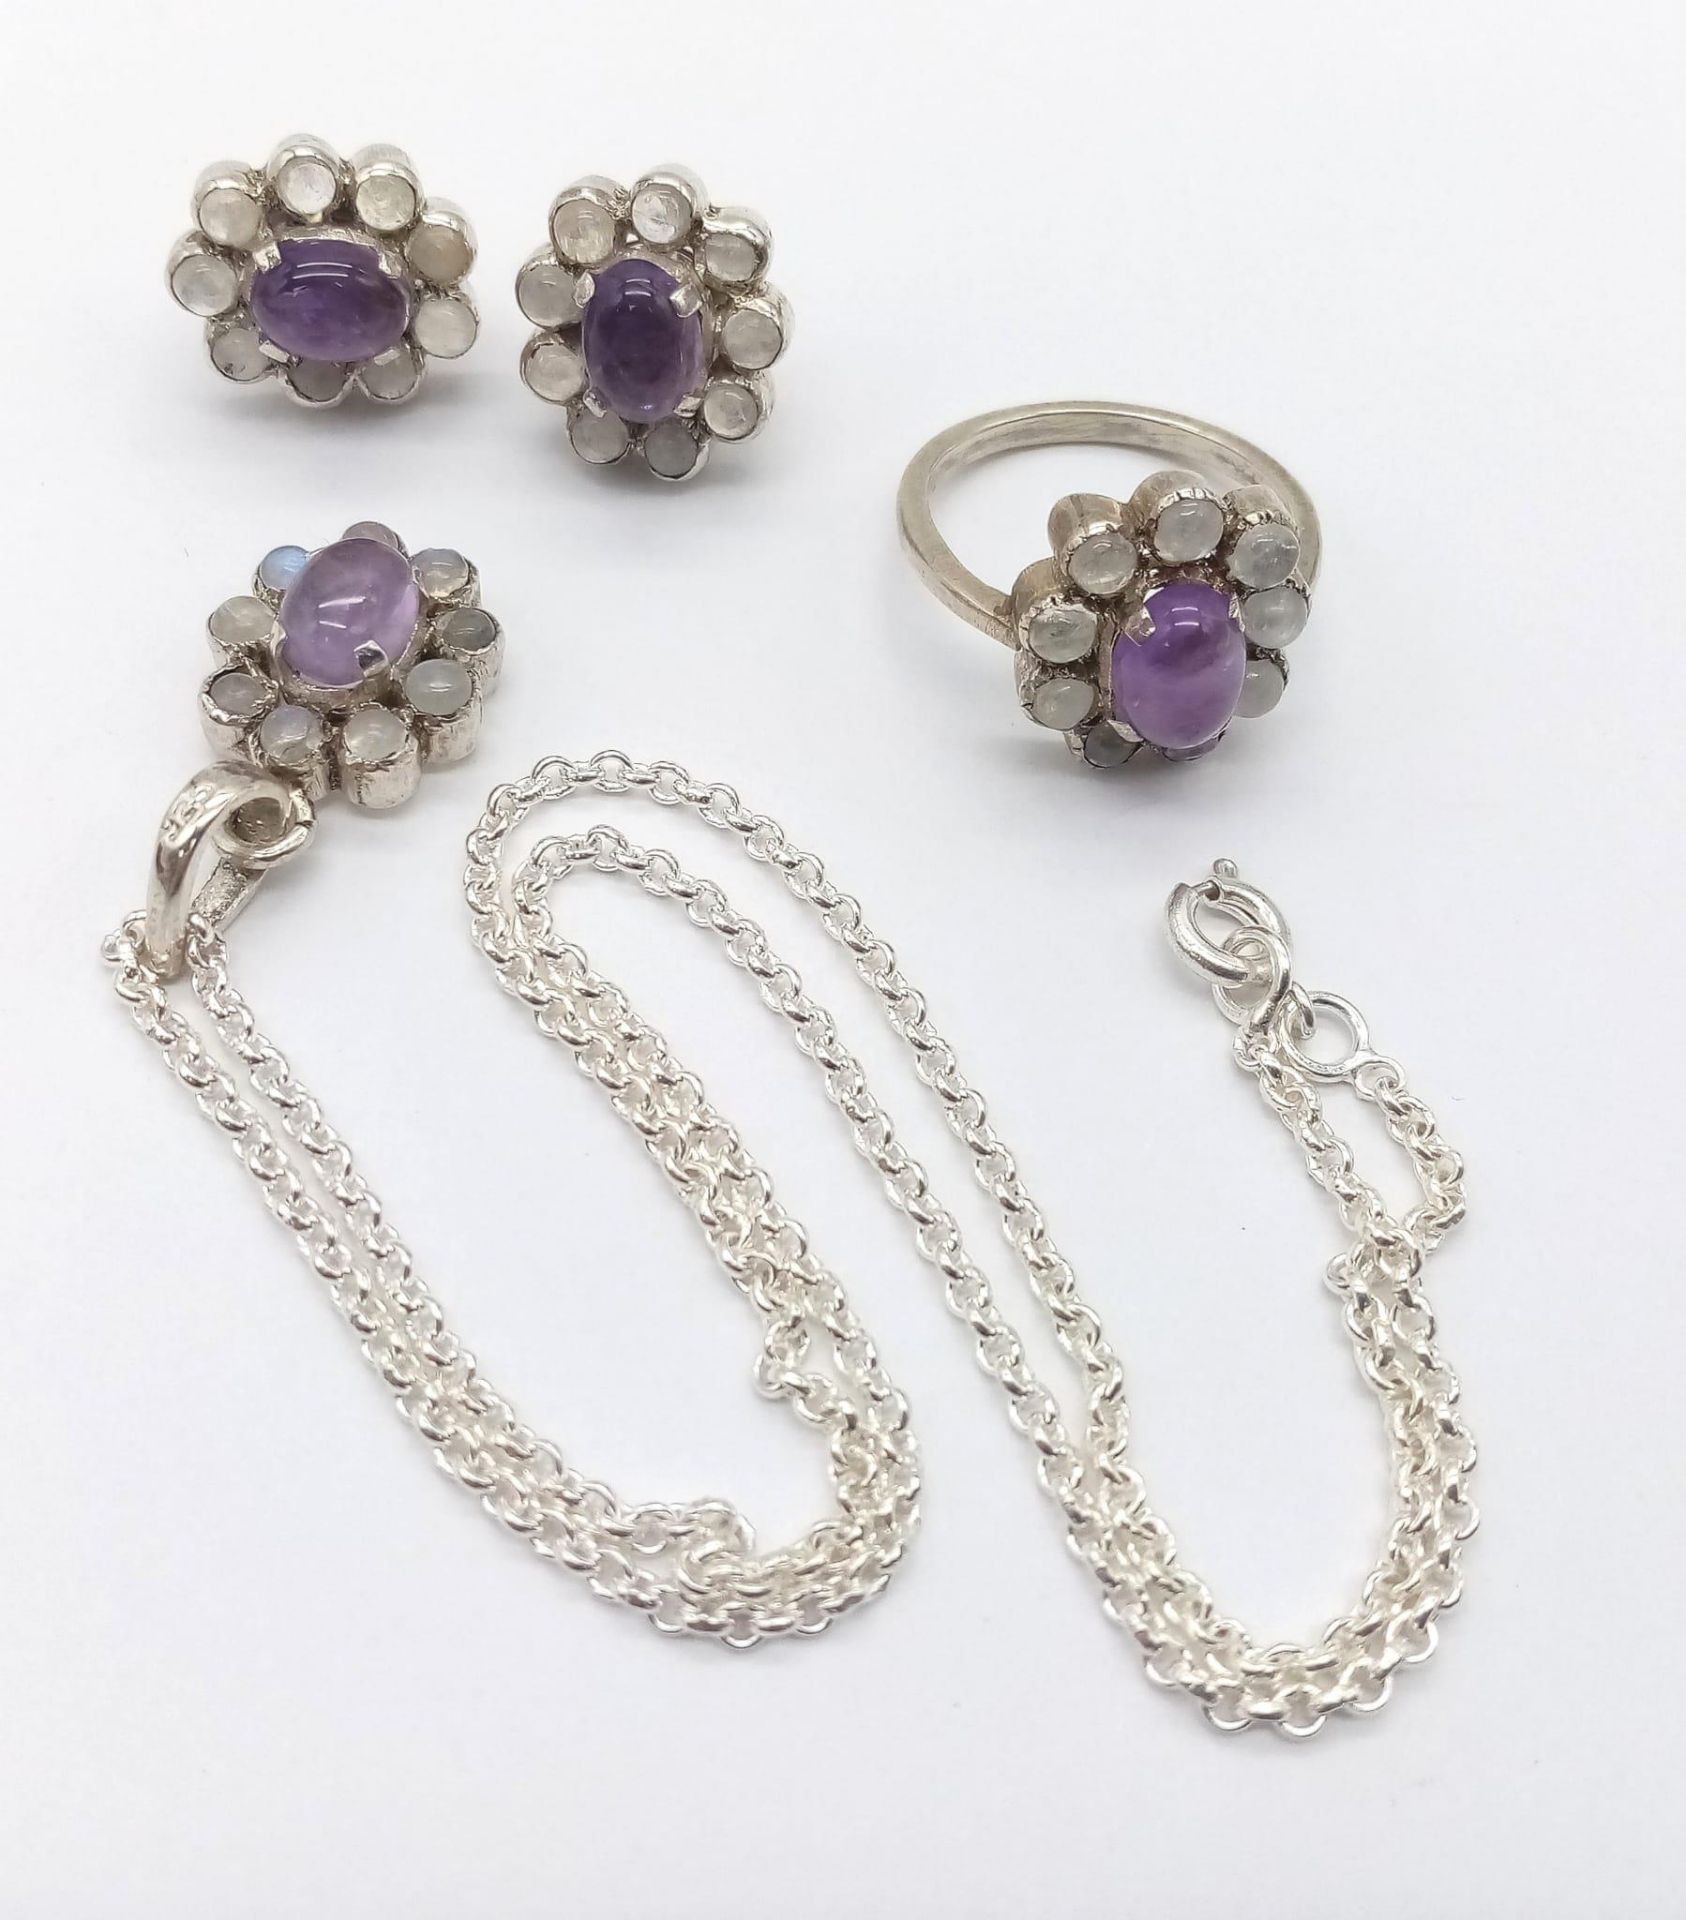 An Amethyst & Moonstone 925 Silver Jewellery set - comprising of a necklace and pendant - 42cm, - Image 2 of 5